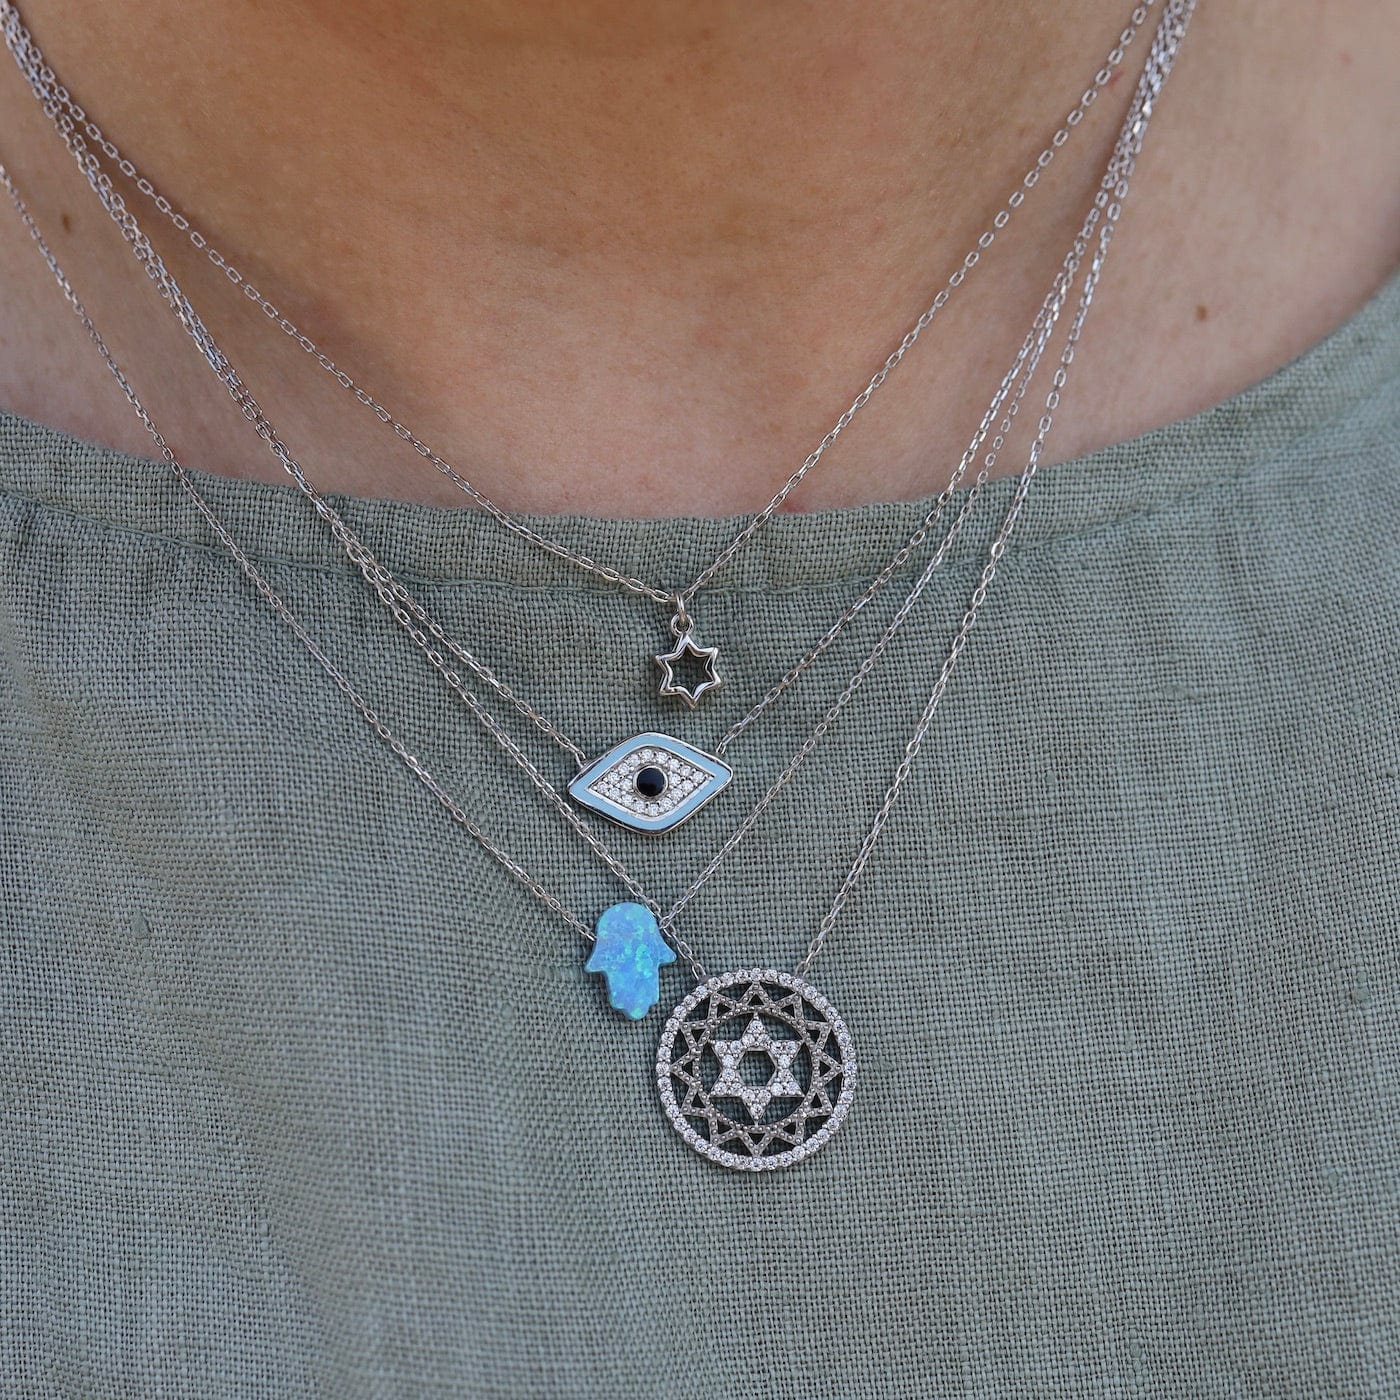 NKL Intricate Star of David Necklace